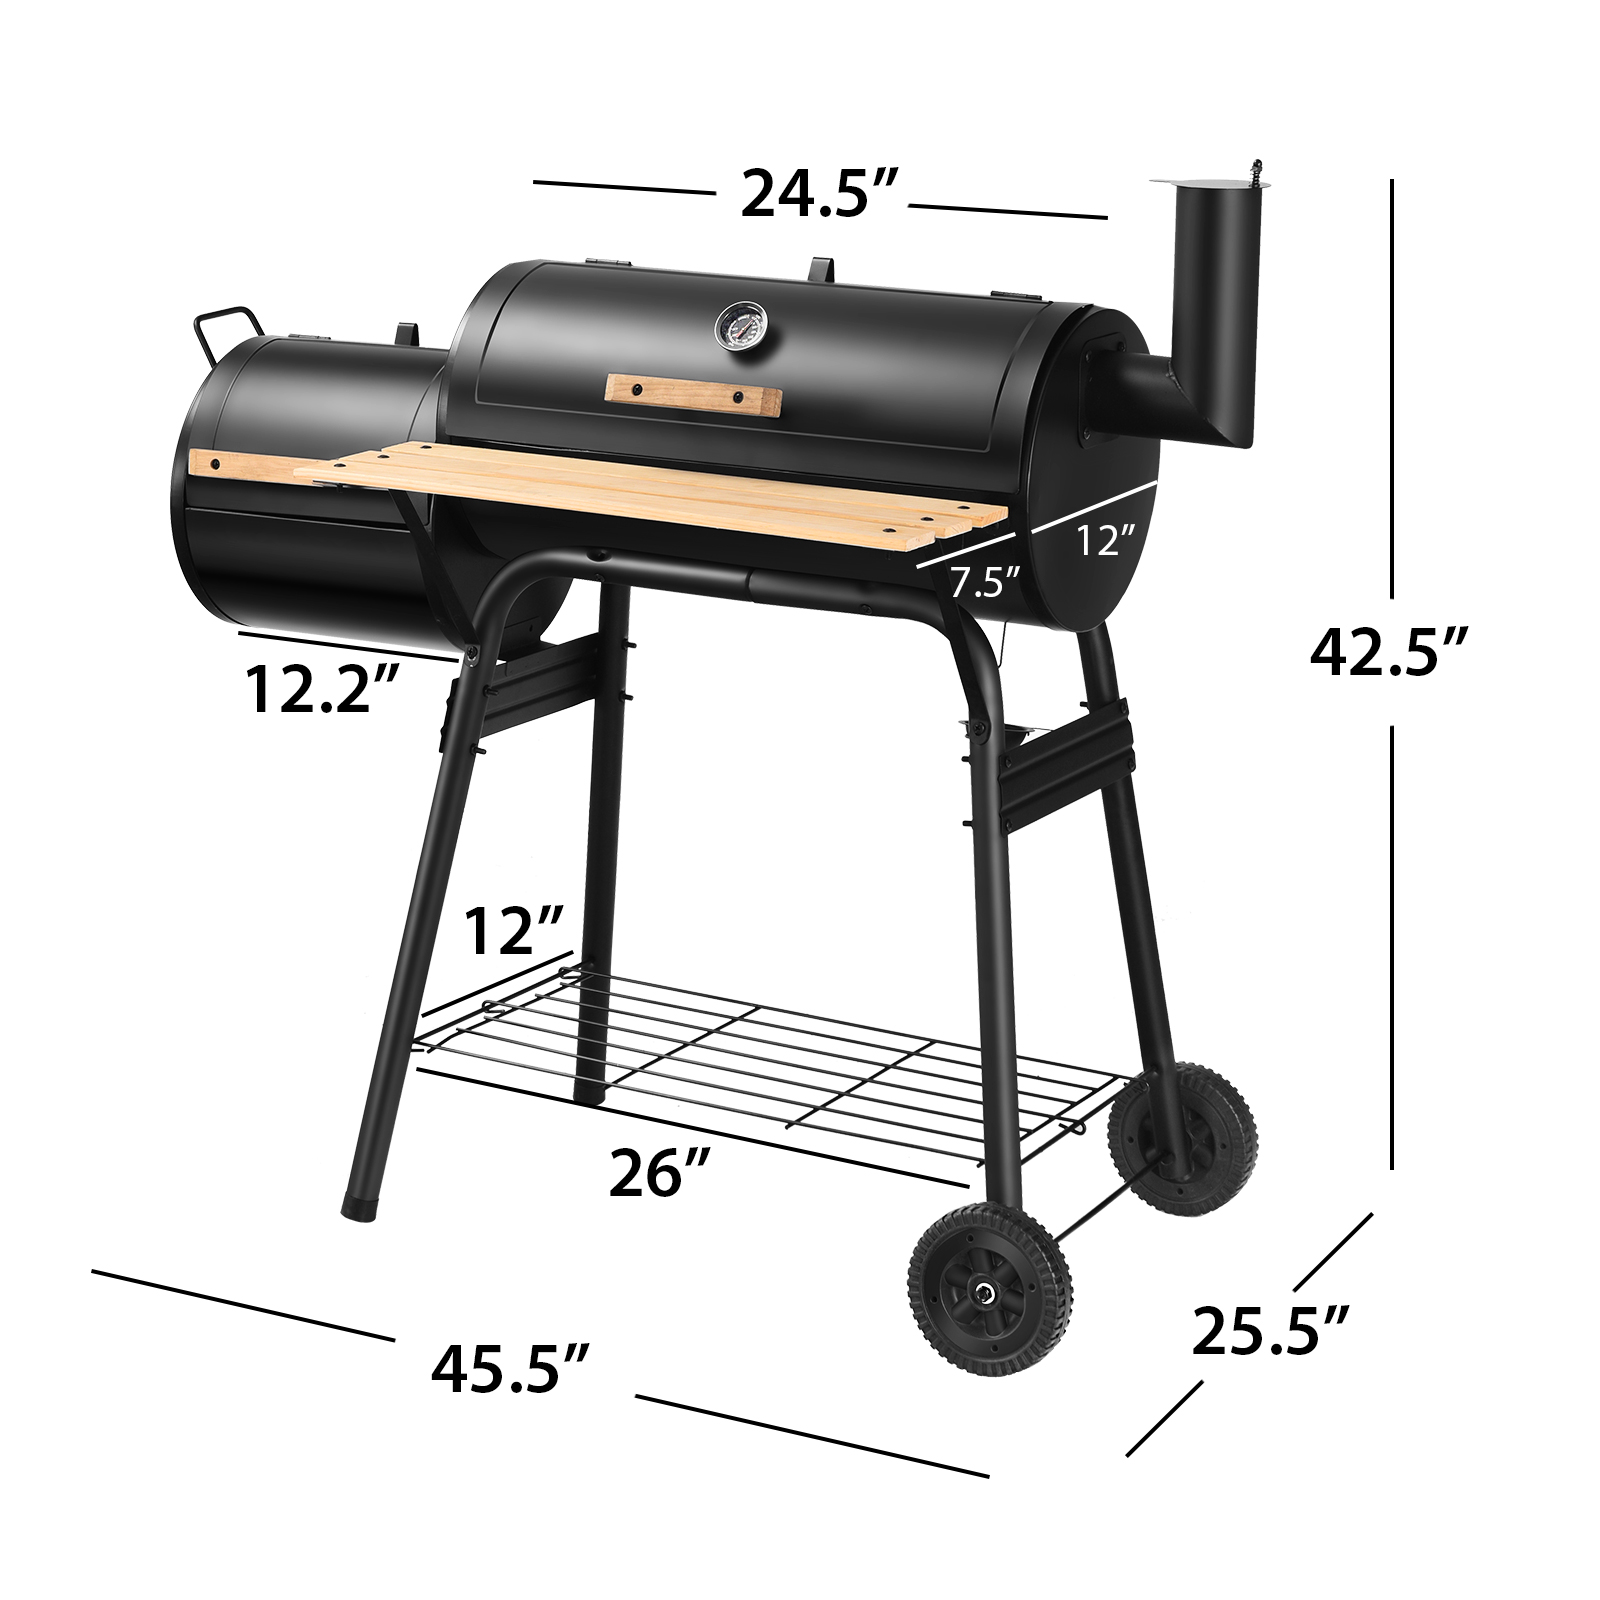 Topbuy BBQ Grill Charcoal Barbecue Meat Smoker Backyard Camping - image 2 of 10